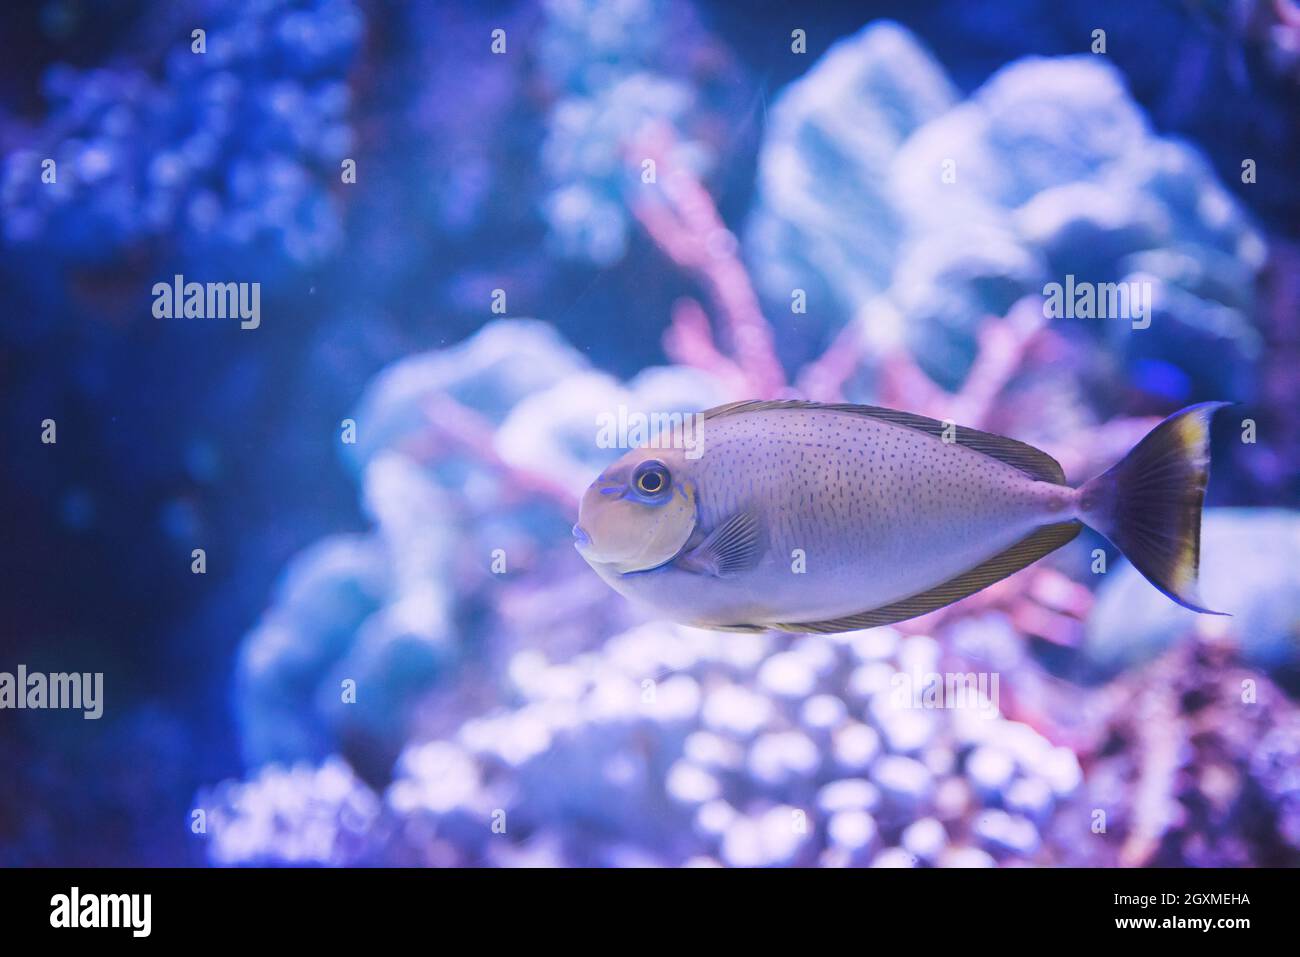 underwater photography of a fish swimming in freshwater aquarium Stock Photo